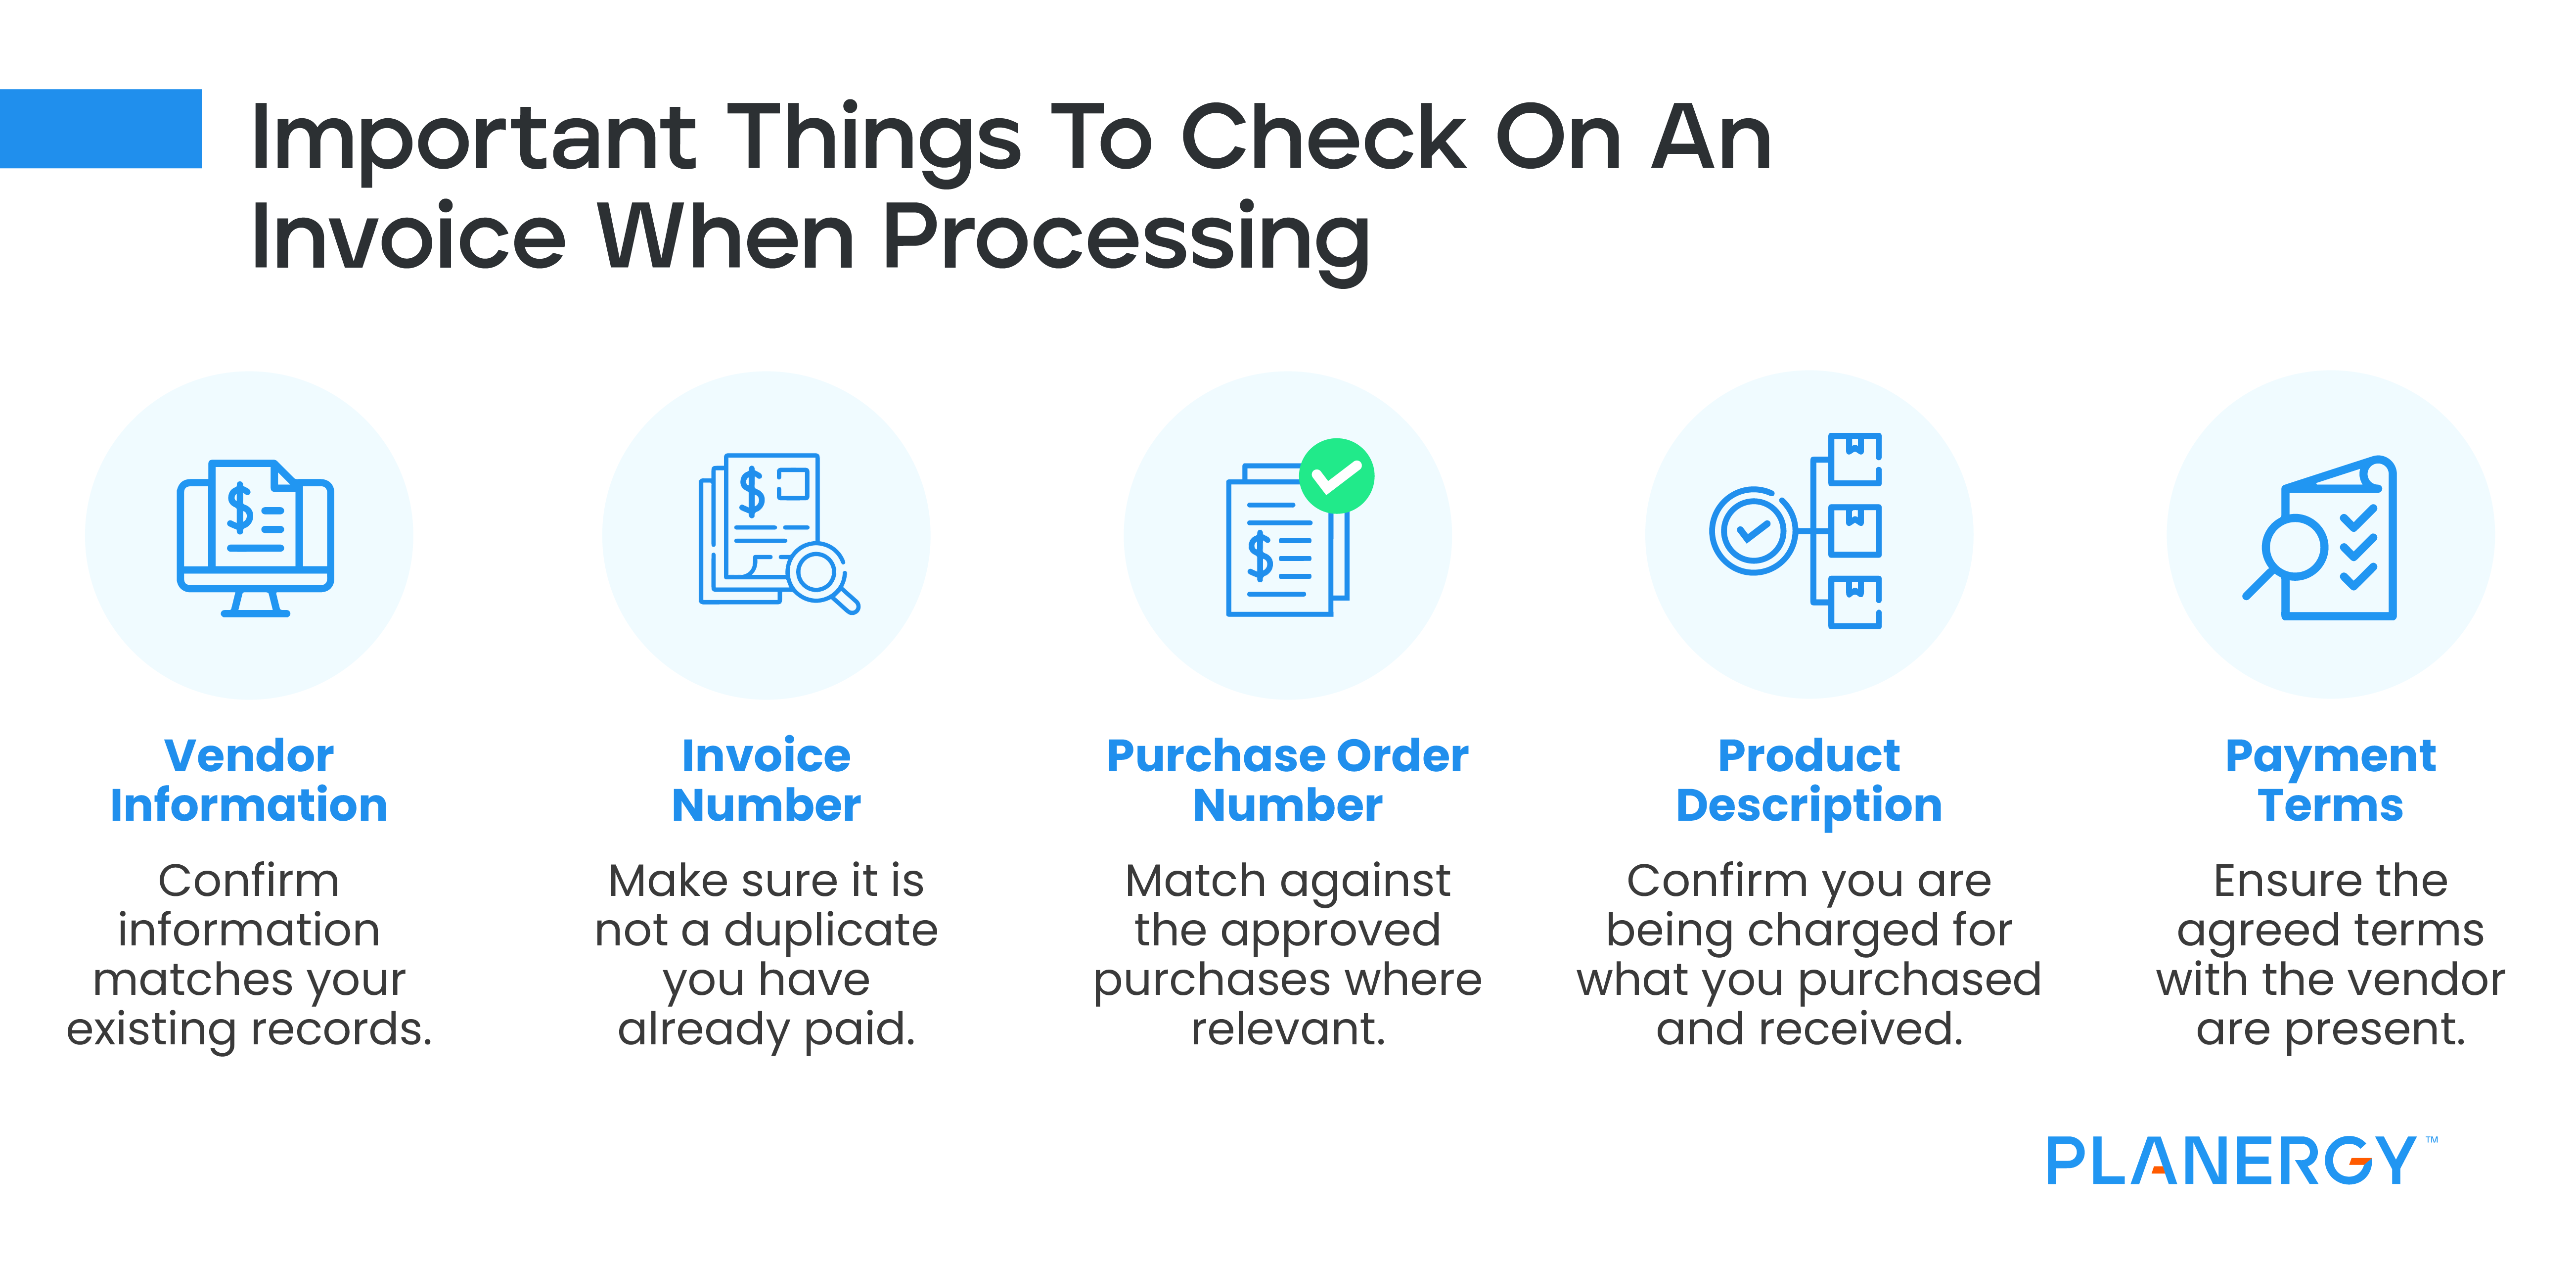 Important Things to Check When Processing Invoices